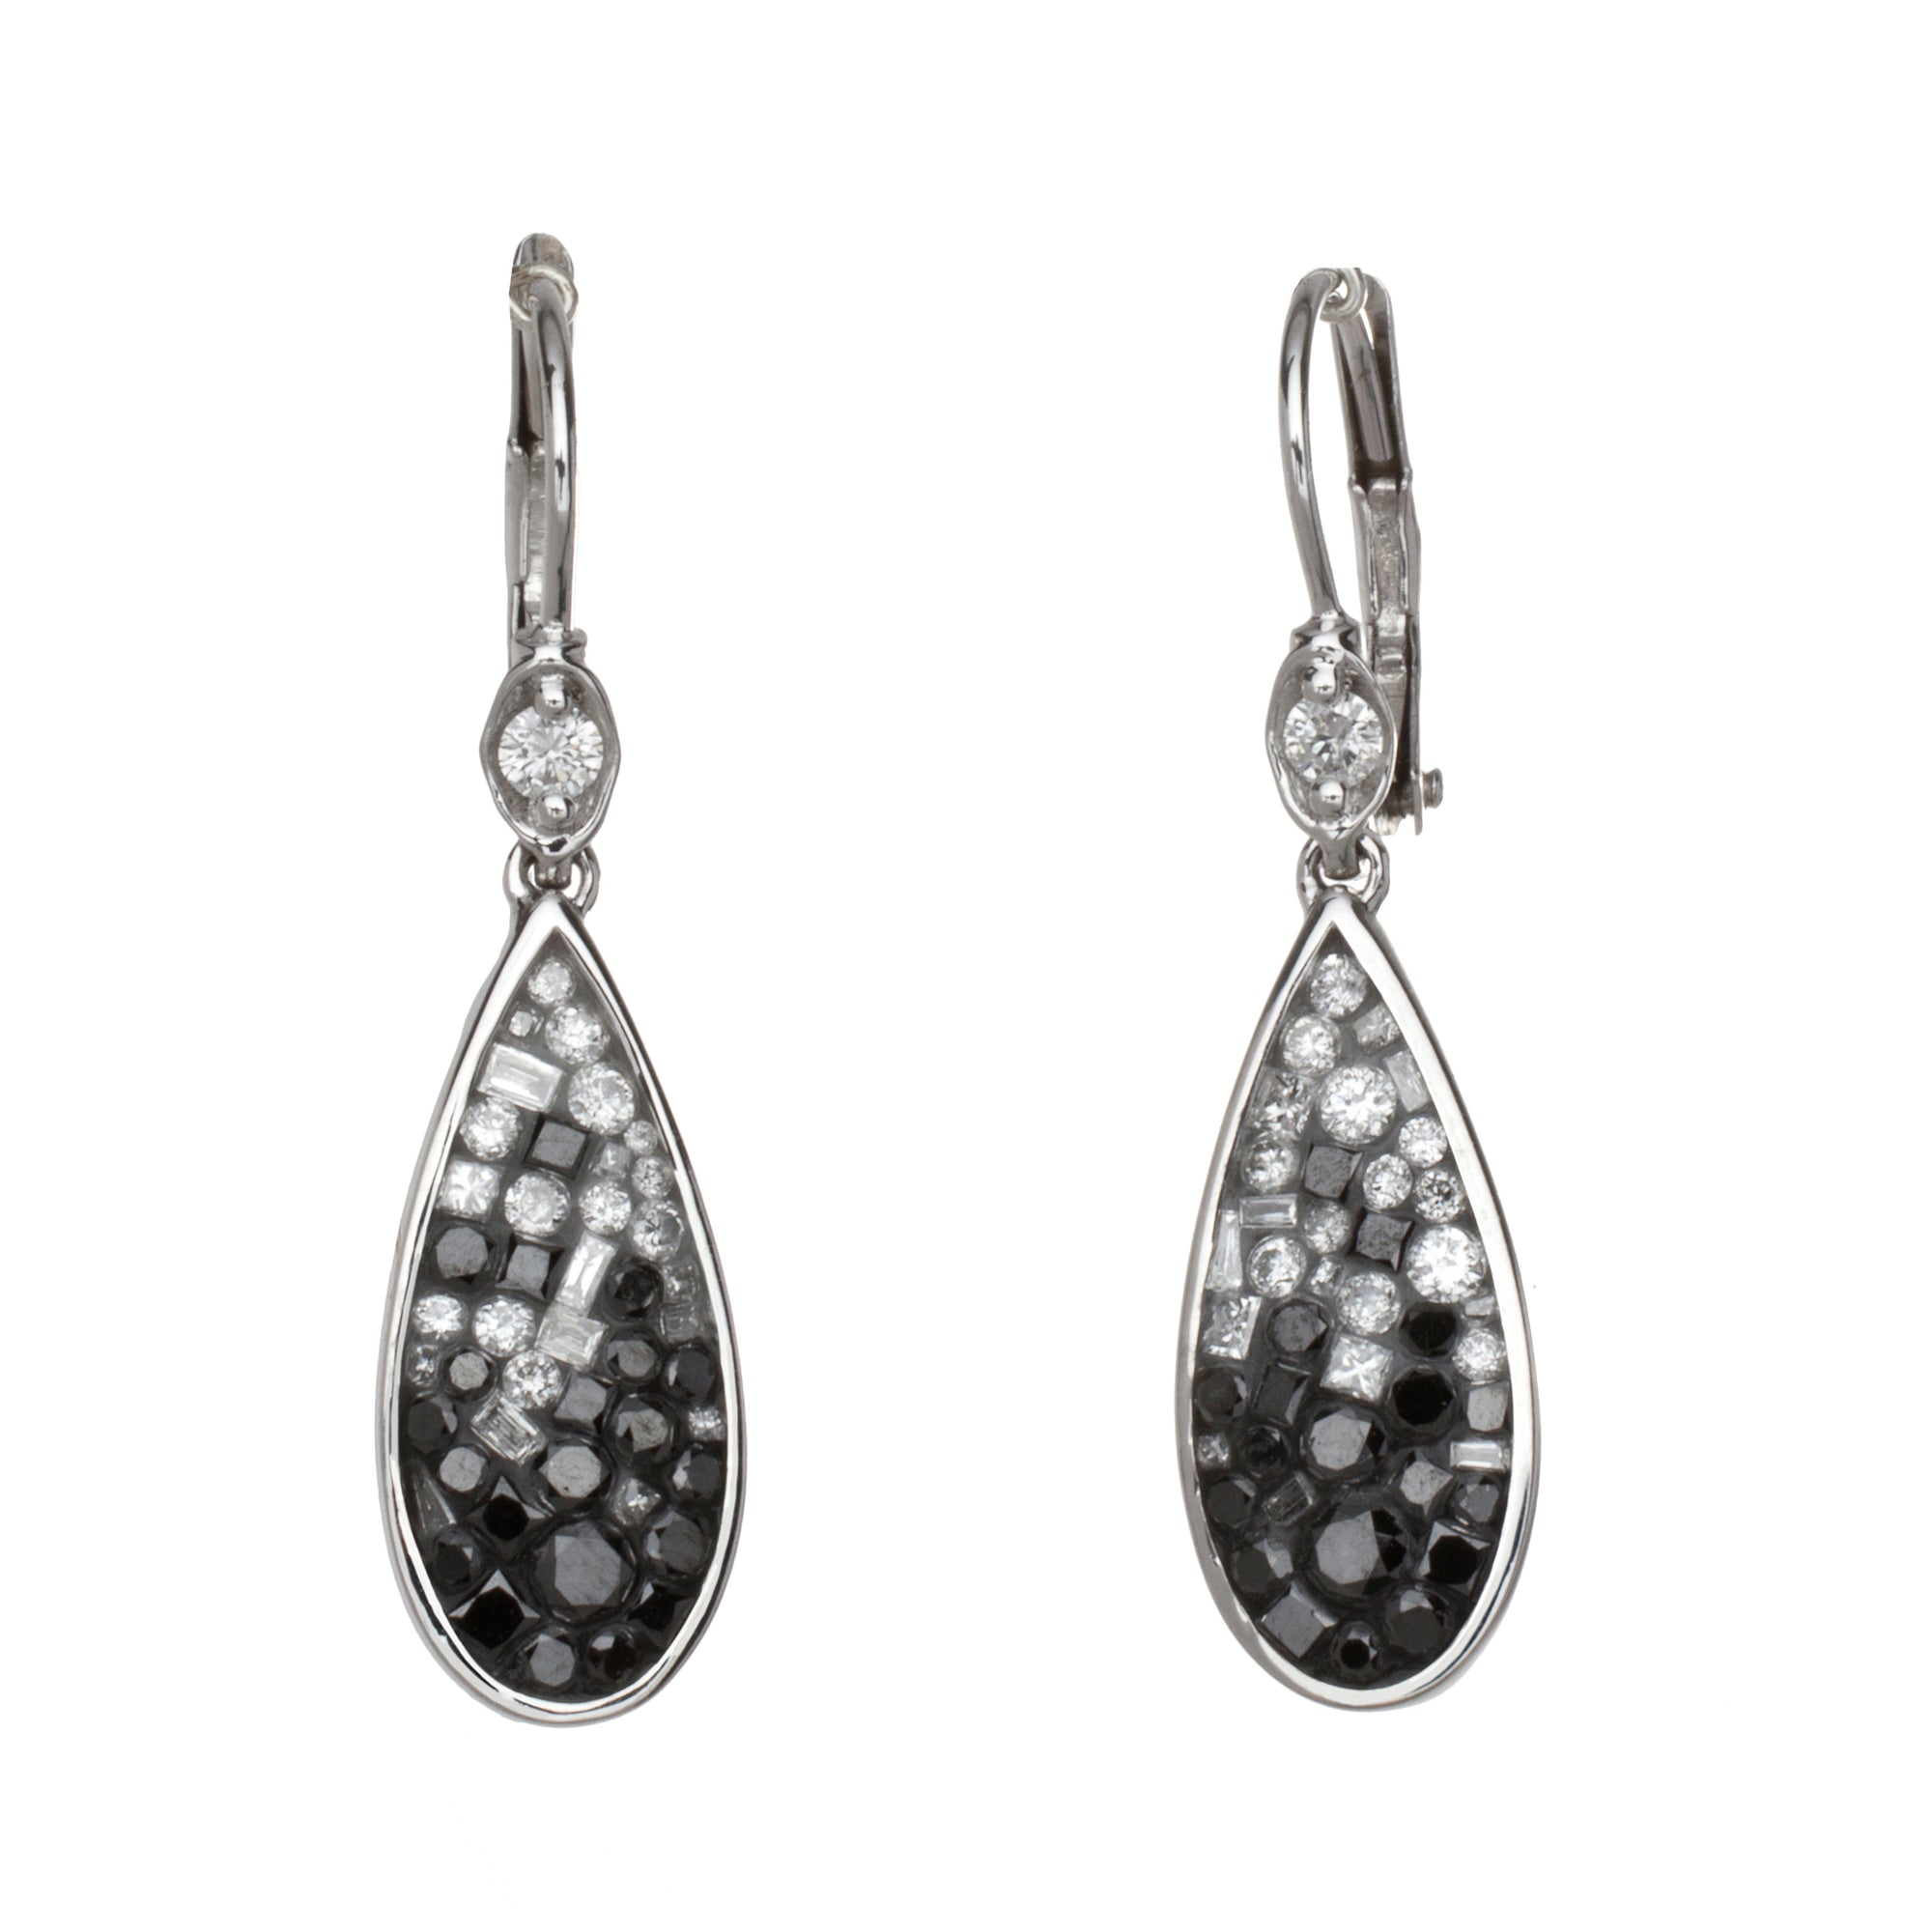 Black Ombre Teardrop Diamond Earrings by Pleve available at Talisman Collection Fine Jewelers in El Dorado Hills, CA and online. Specs: 18k wg dia & color enhanced dia 1.70 cttw 